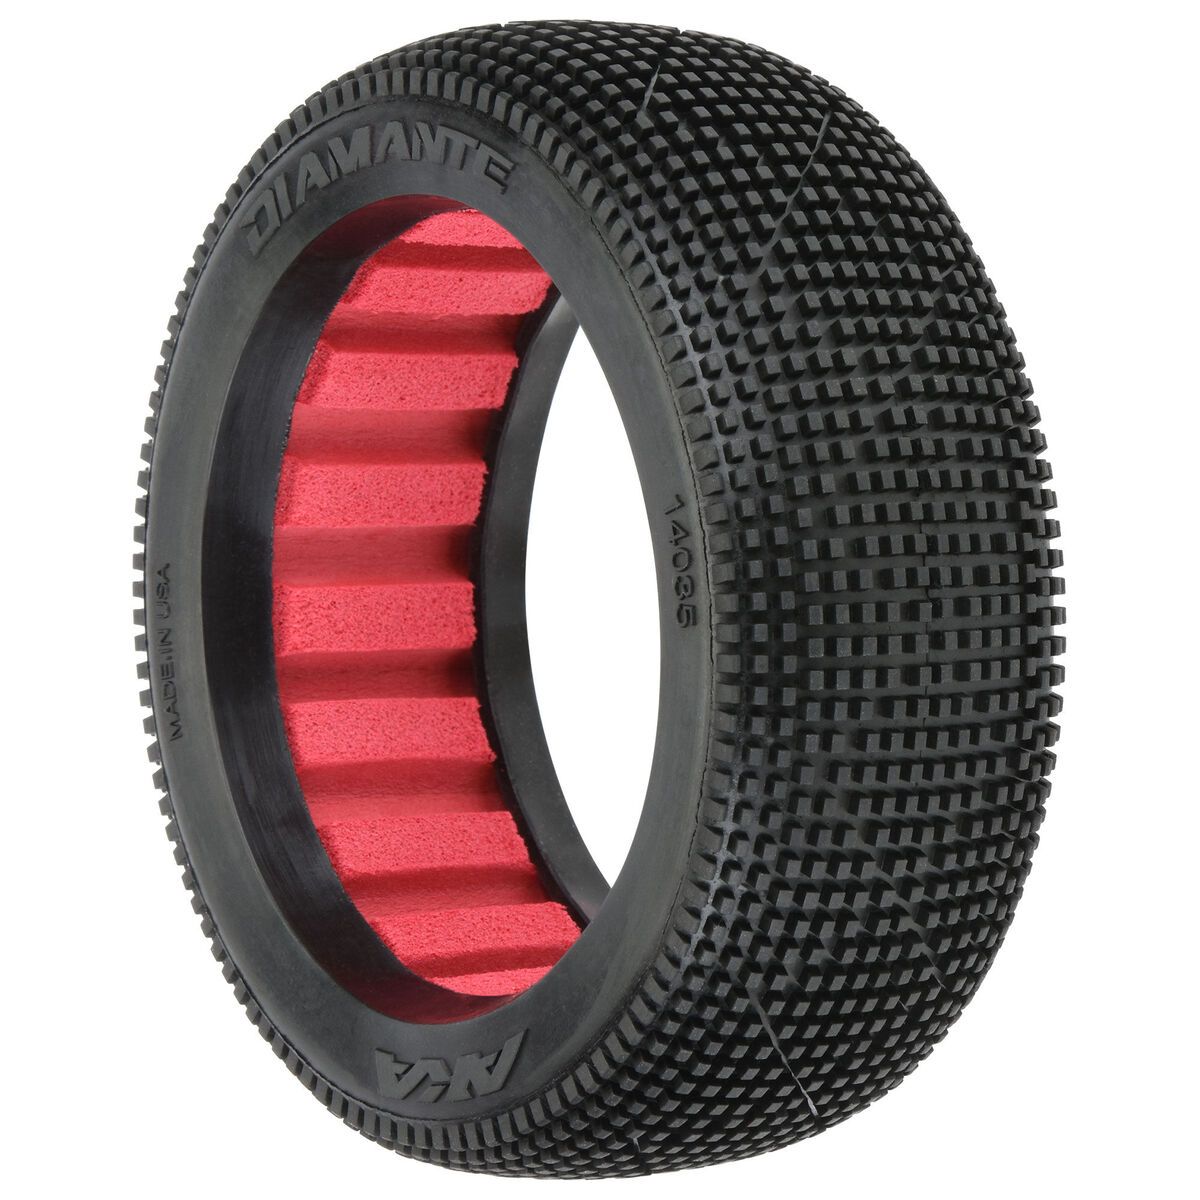 AKA Products, Inc. 14035ZR 1:8 Diamante Z Front/Rear Off-Road Buggy Tires